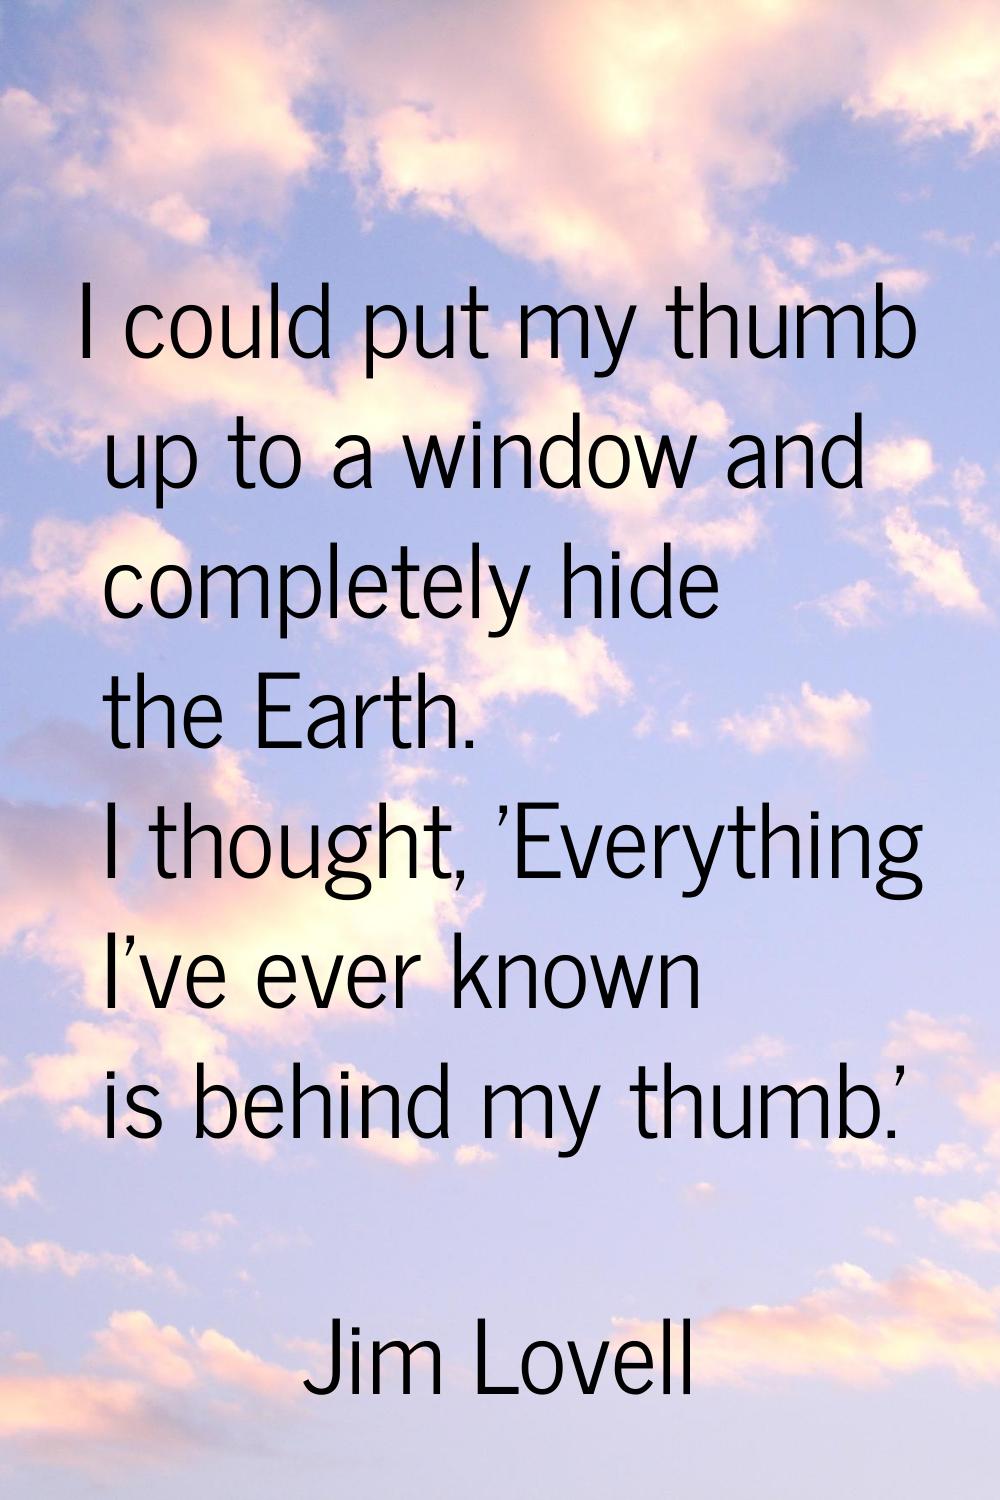 I could put my thumb up to a window and completely hide the Earth. I thought, 'Everything I've ever